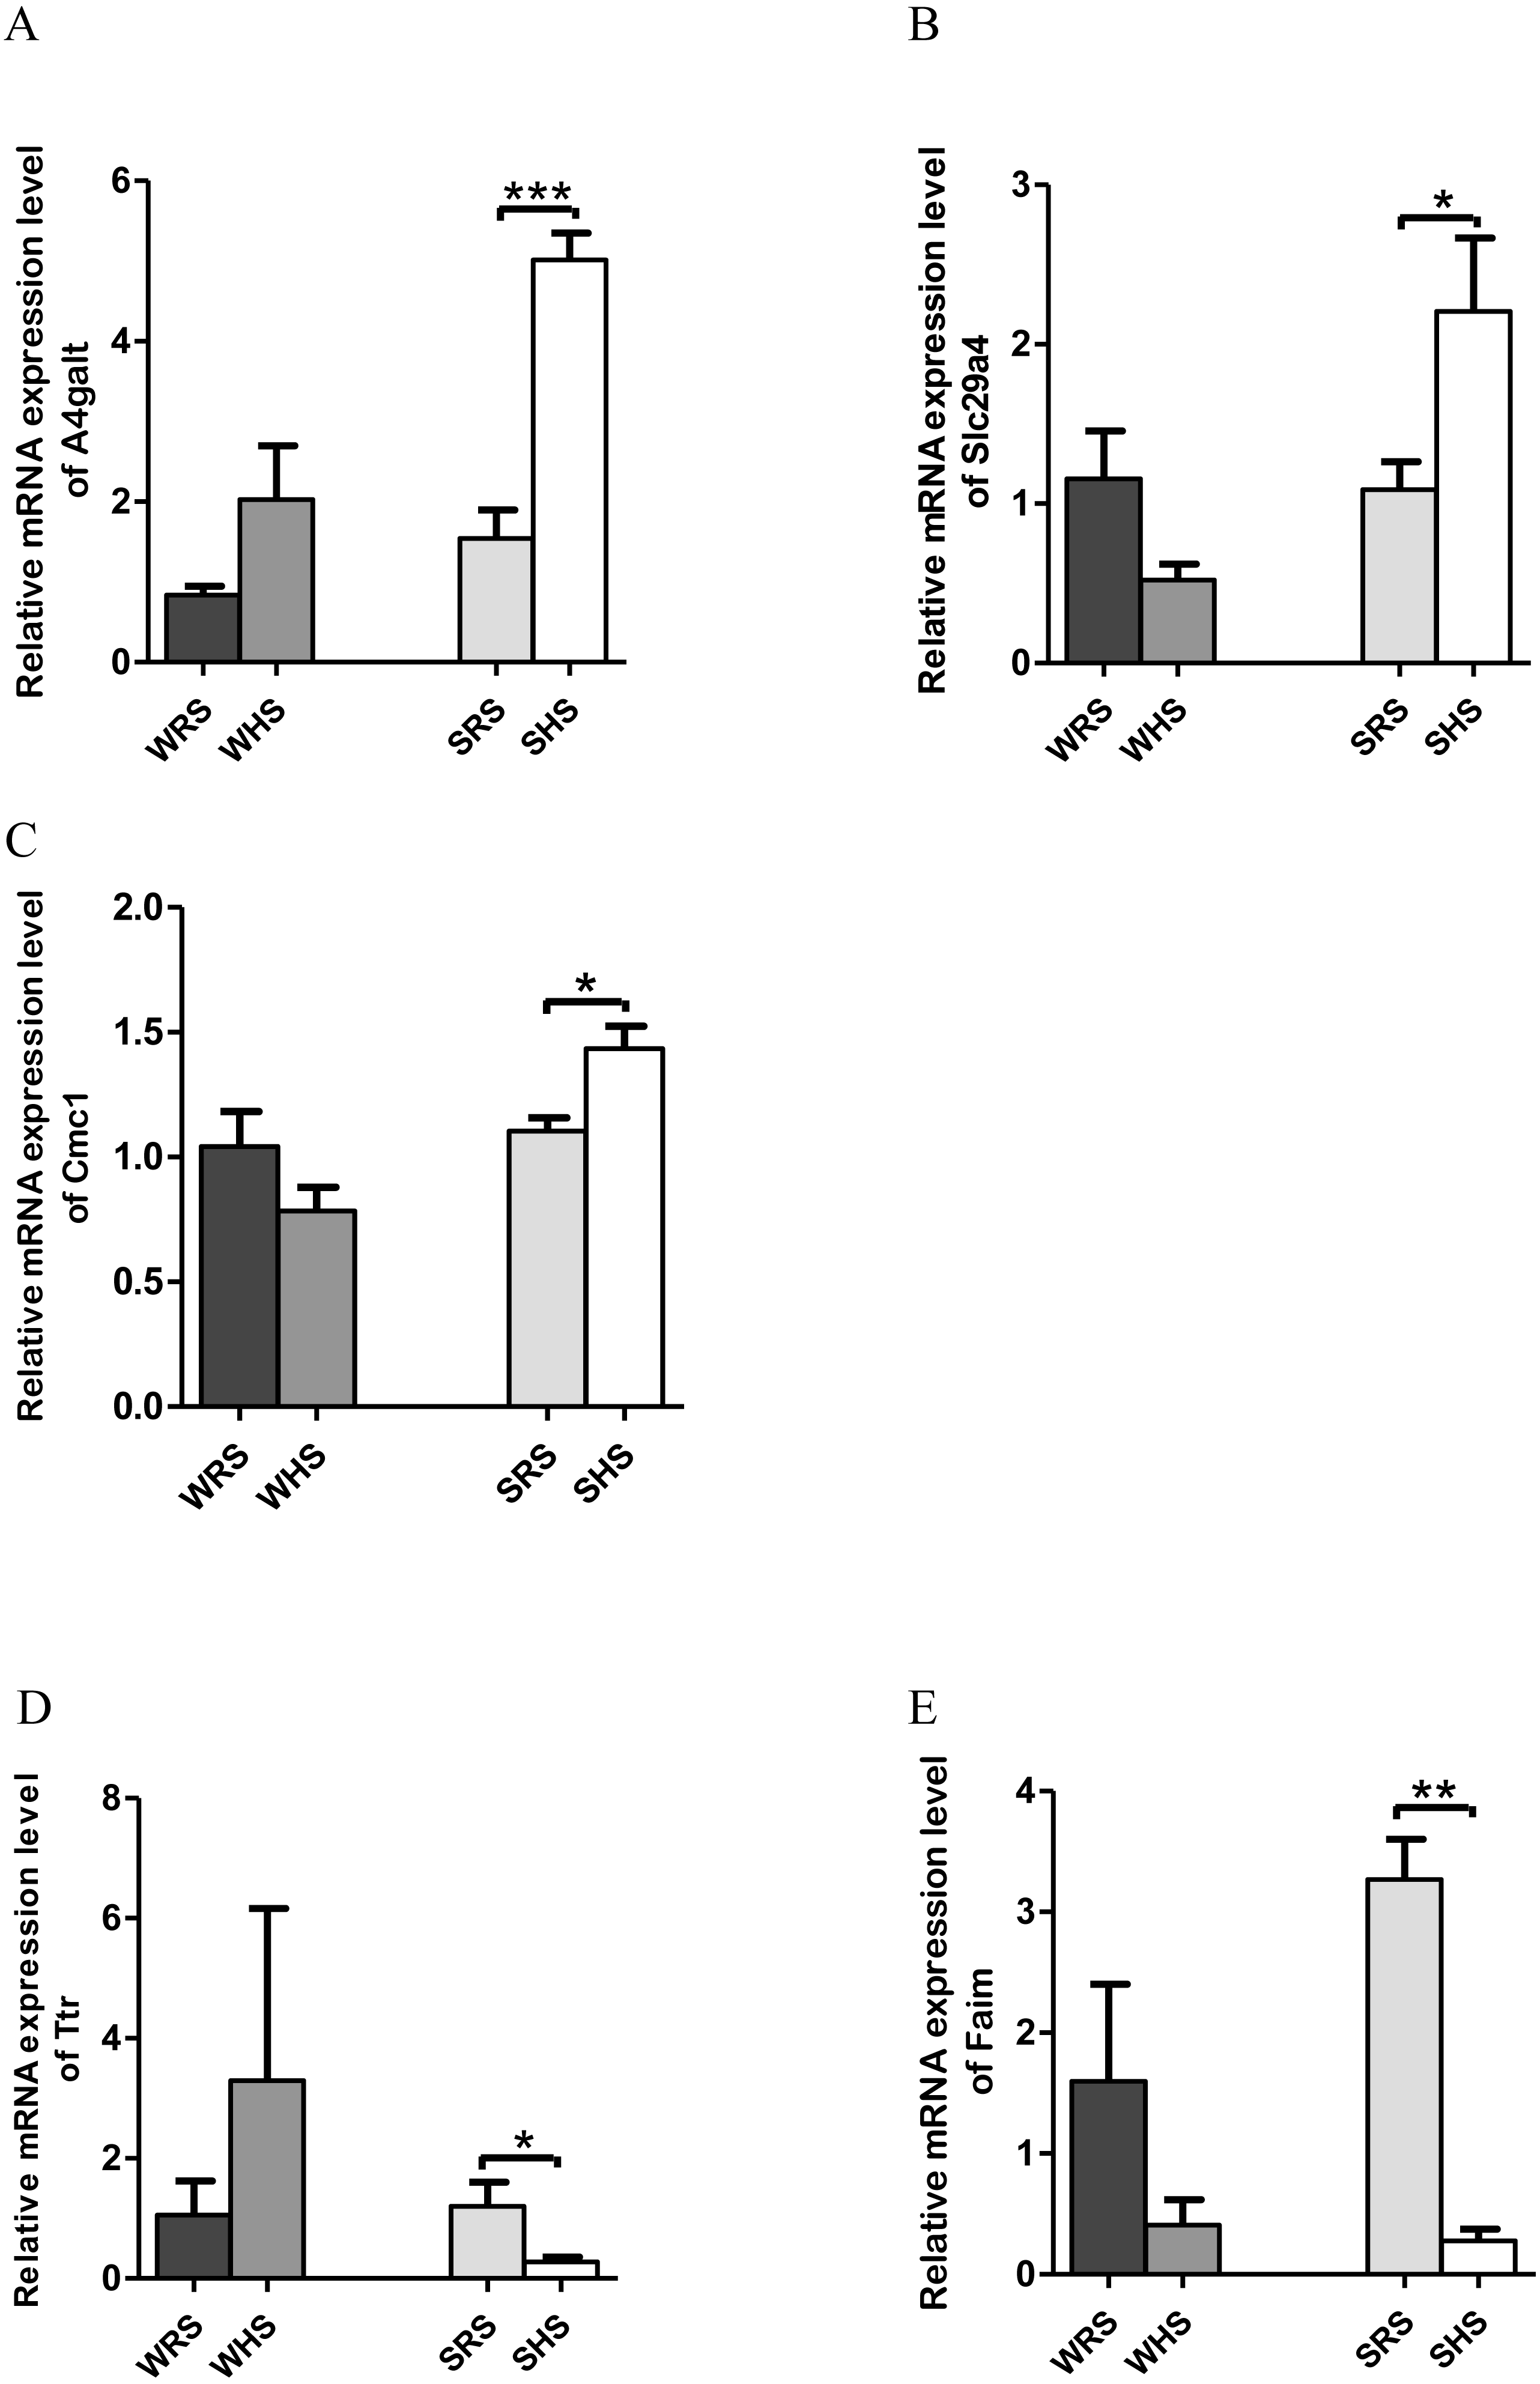 A Preliminary Study Of The Effect Of A High Salt Diet On Transcriptome Dynamics In Rat Hypothalamic Forebrain And Brainstem Cardiovascular Control Centers Peerj